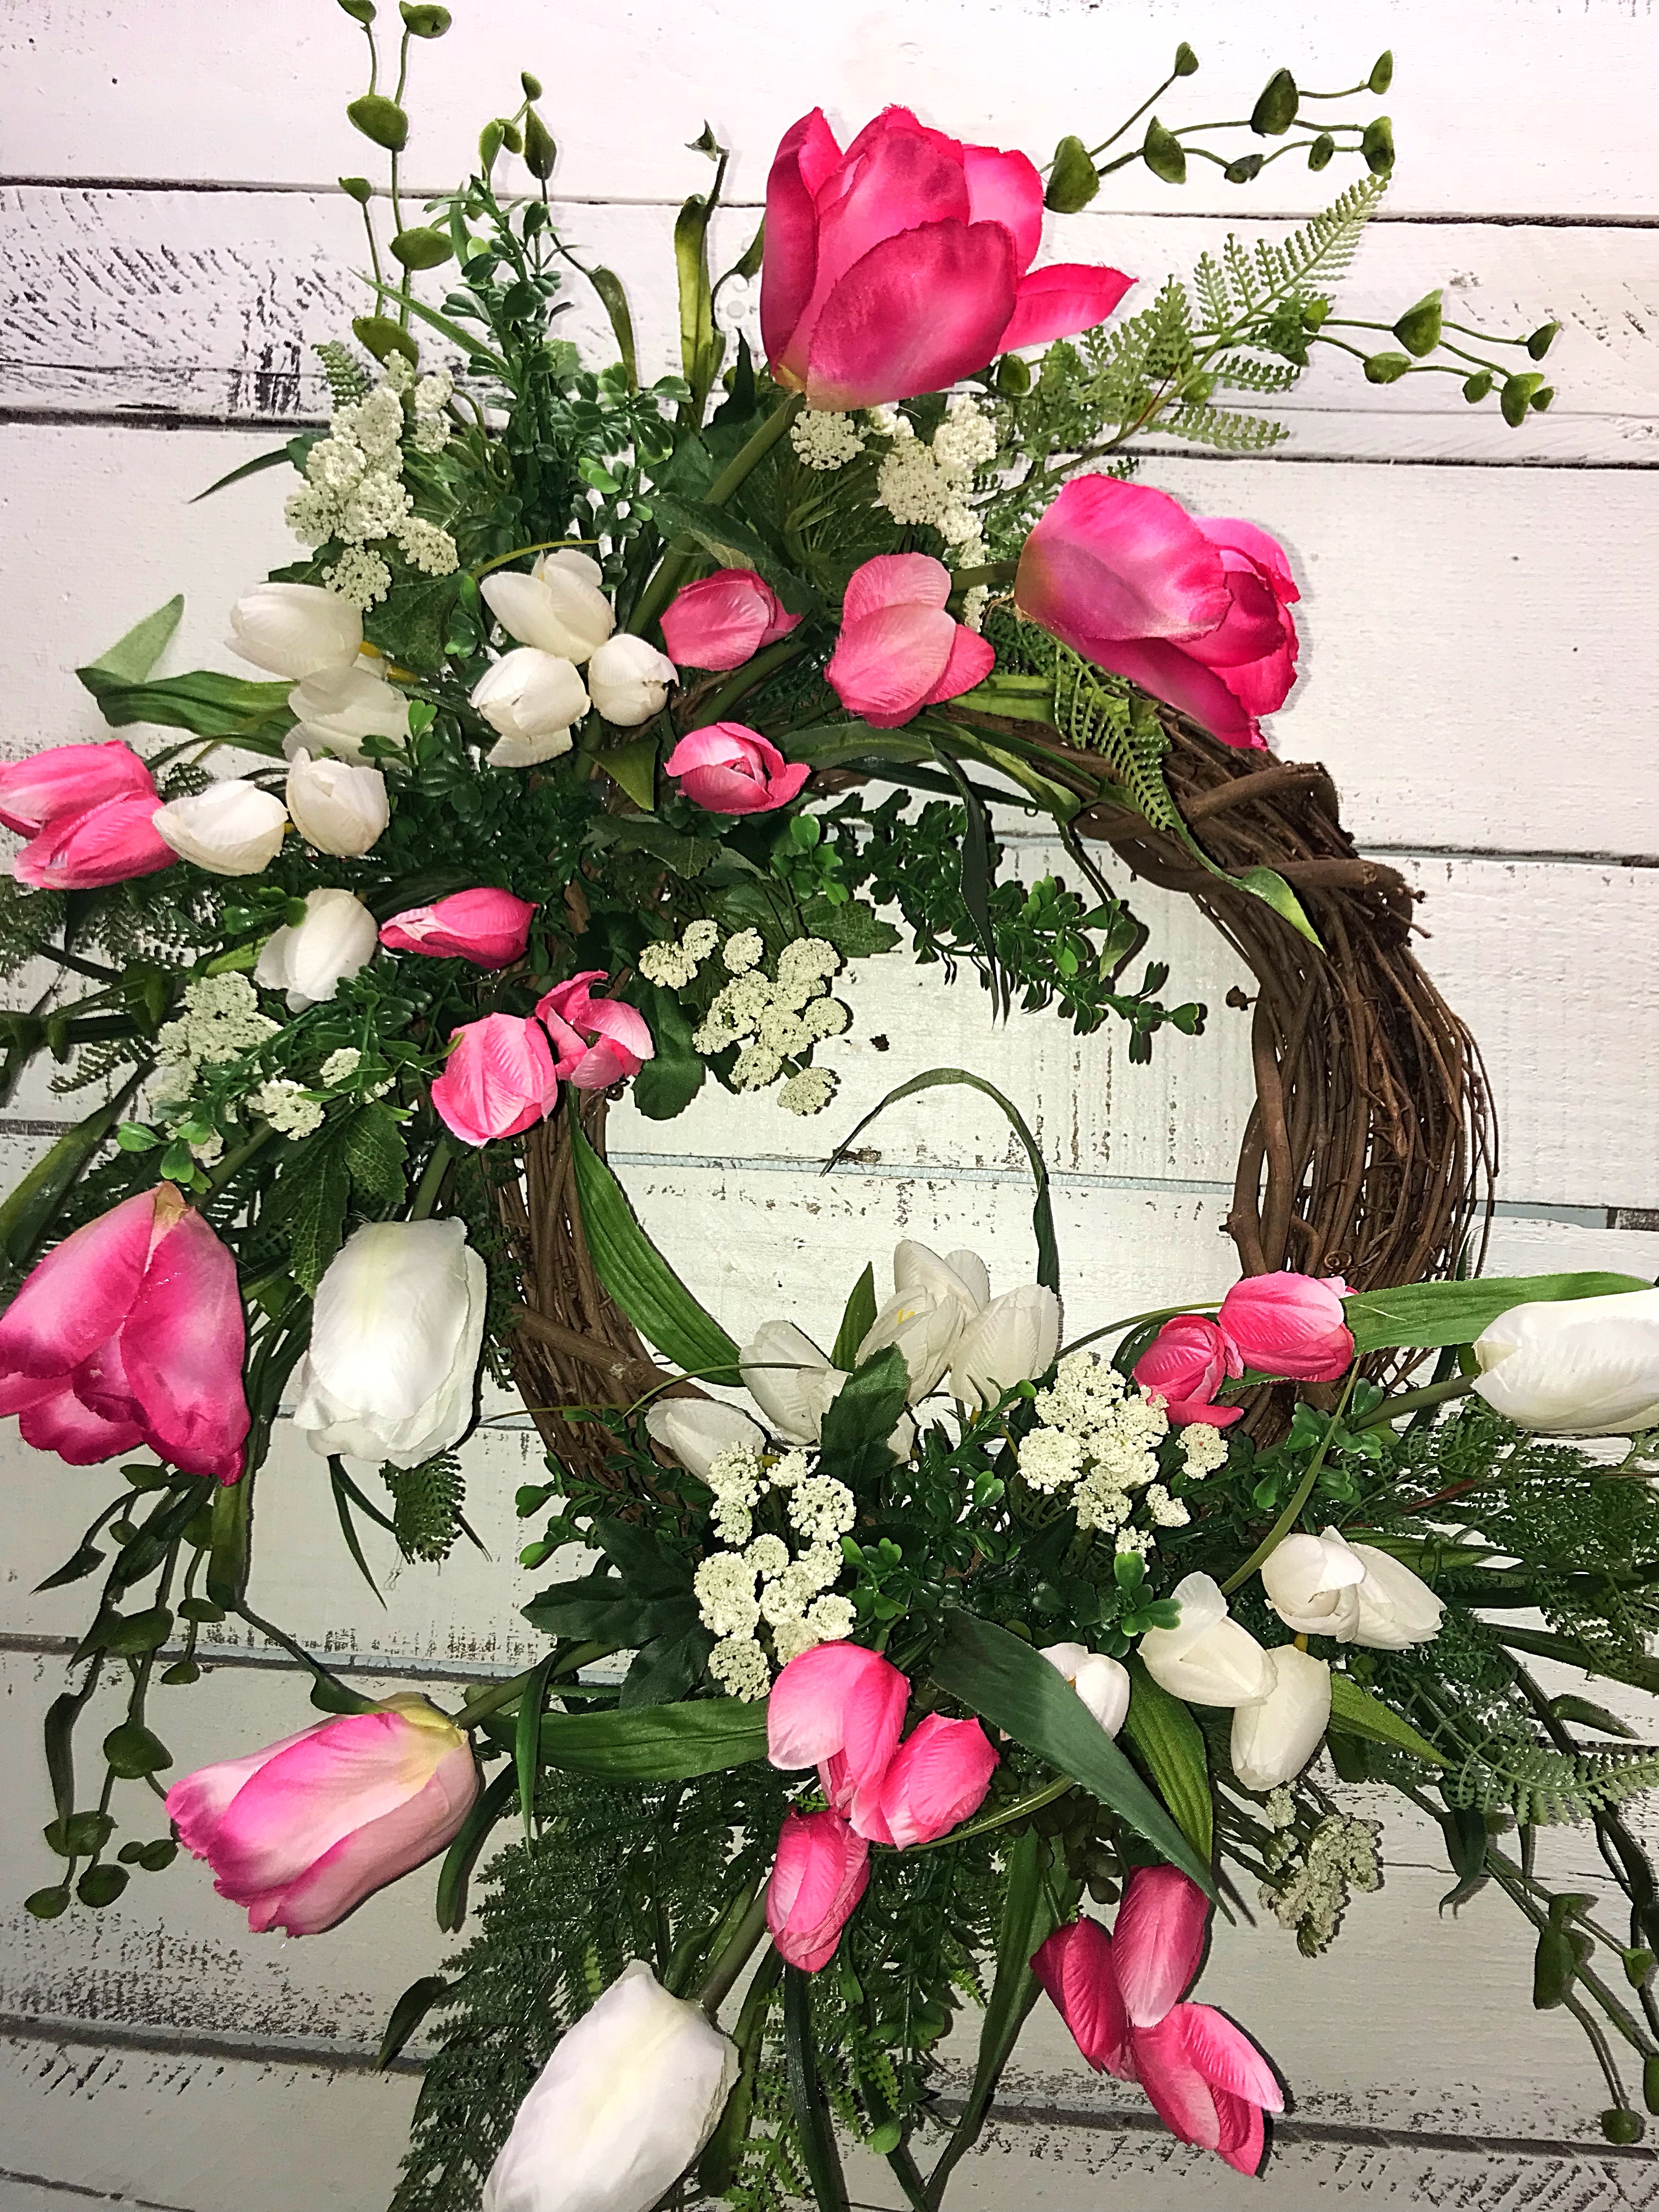 Pink and White Decor Pink Wreaths Spring Trends Tulip Door Wreaths Spring Tulip Wreaths Spring Designs Pink Tulip Wreath Tulip Wreath